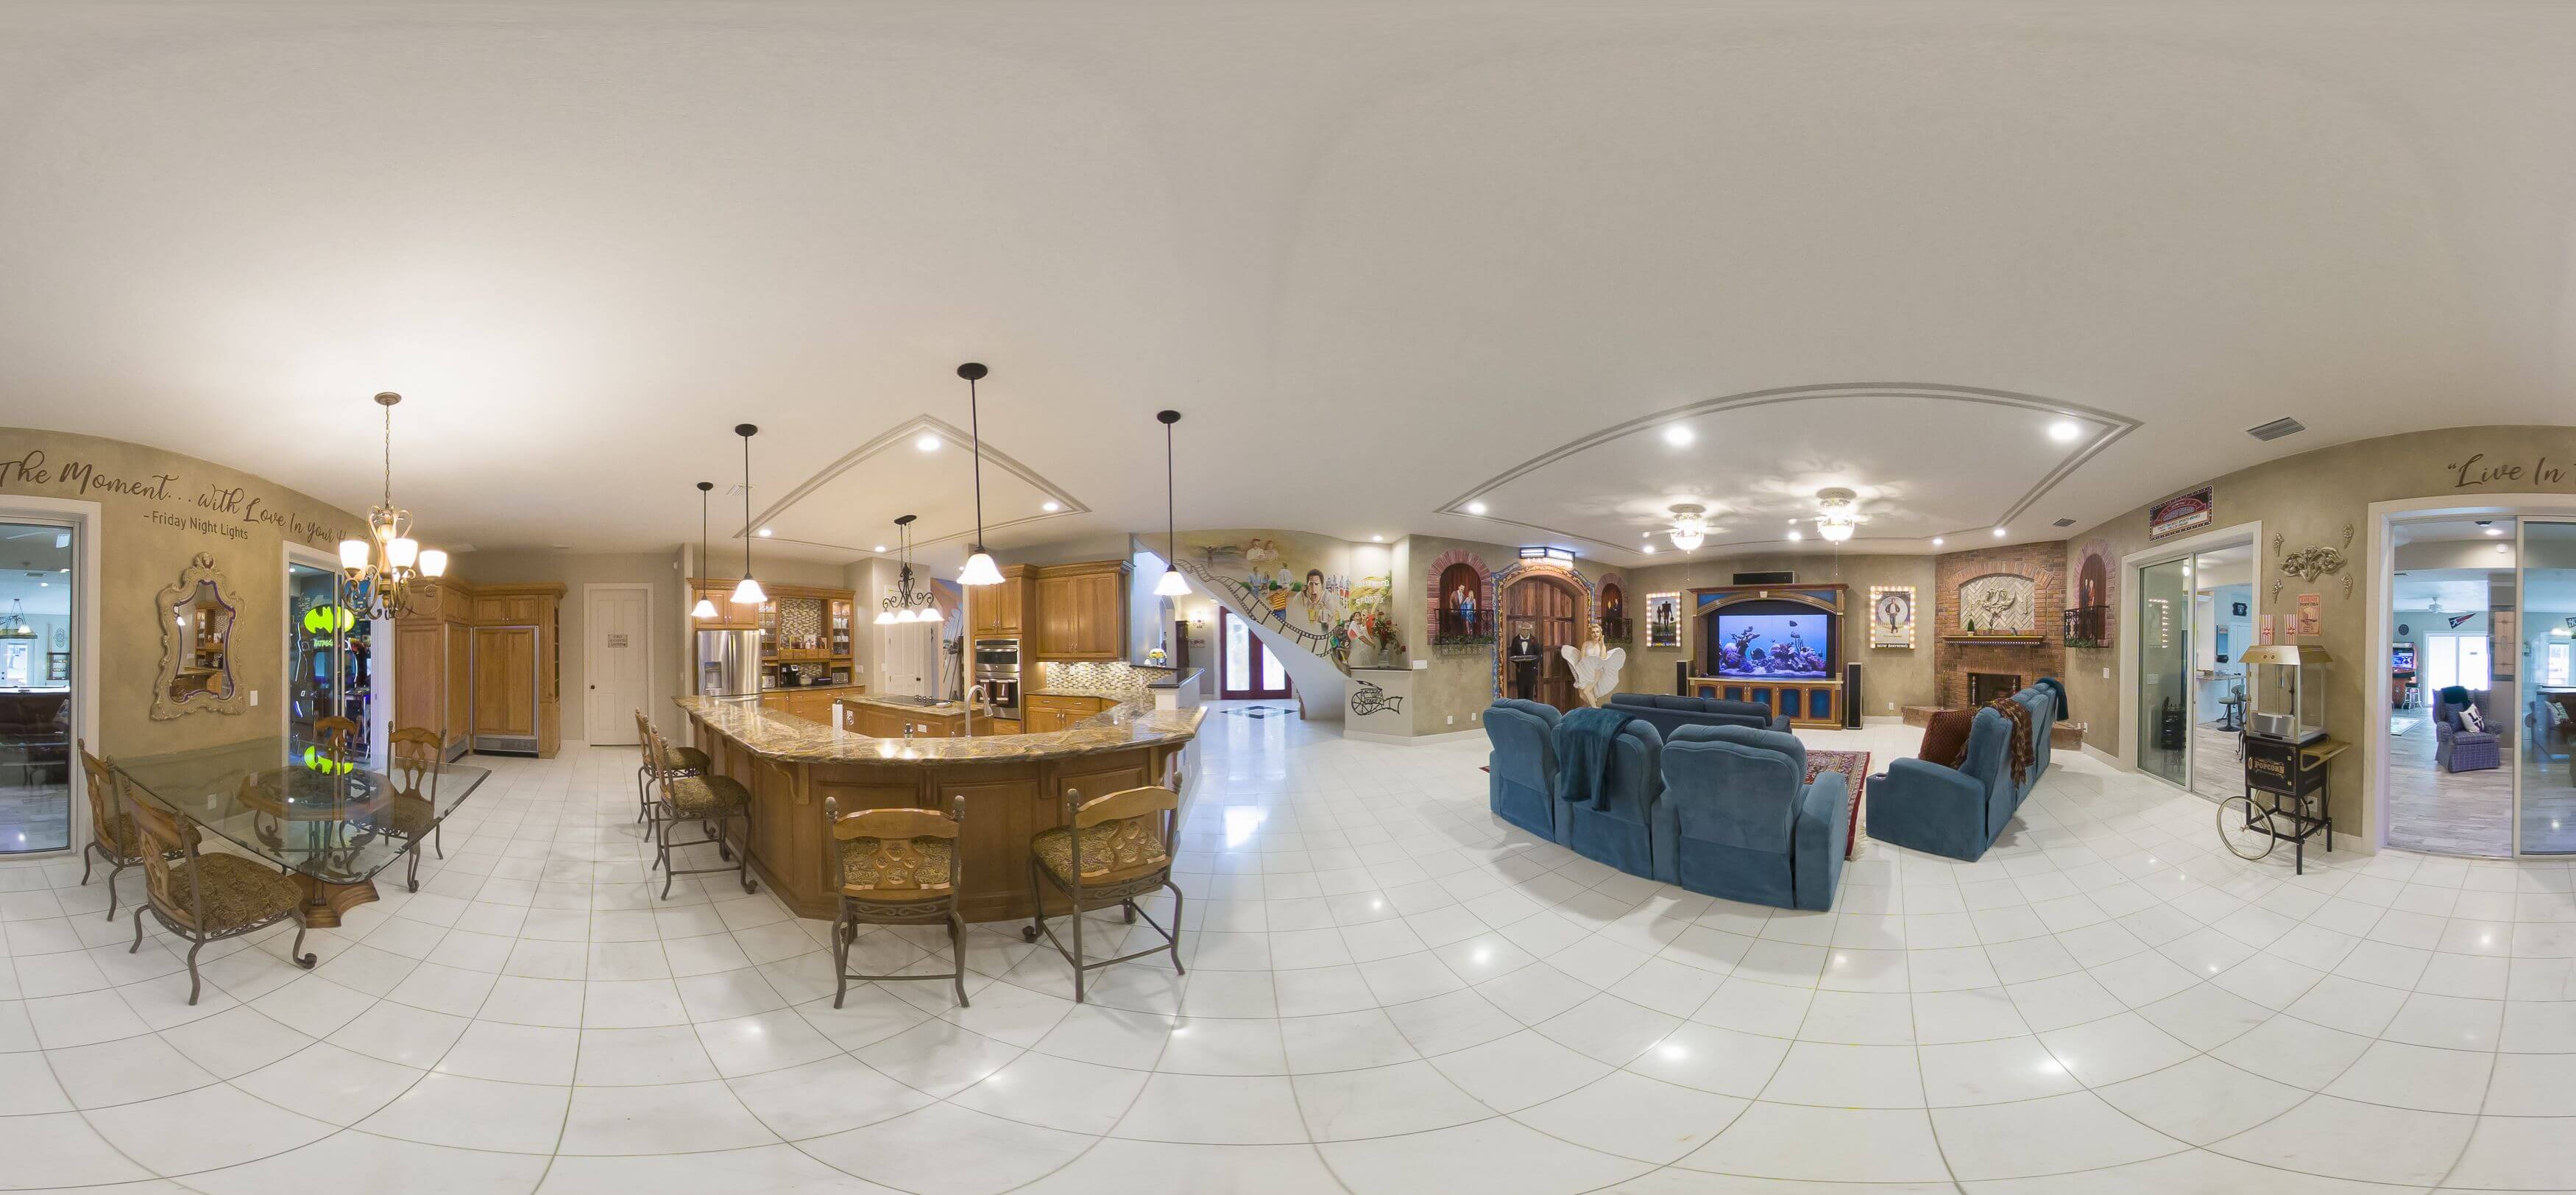 large kitchen at vacation home near Orlando for family reunions